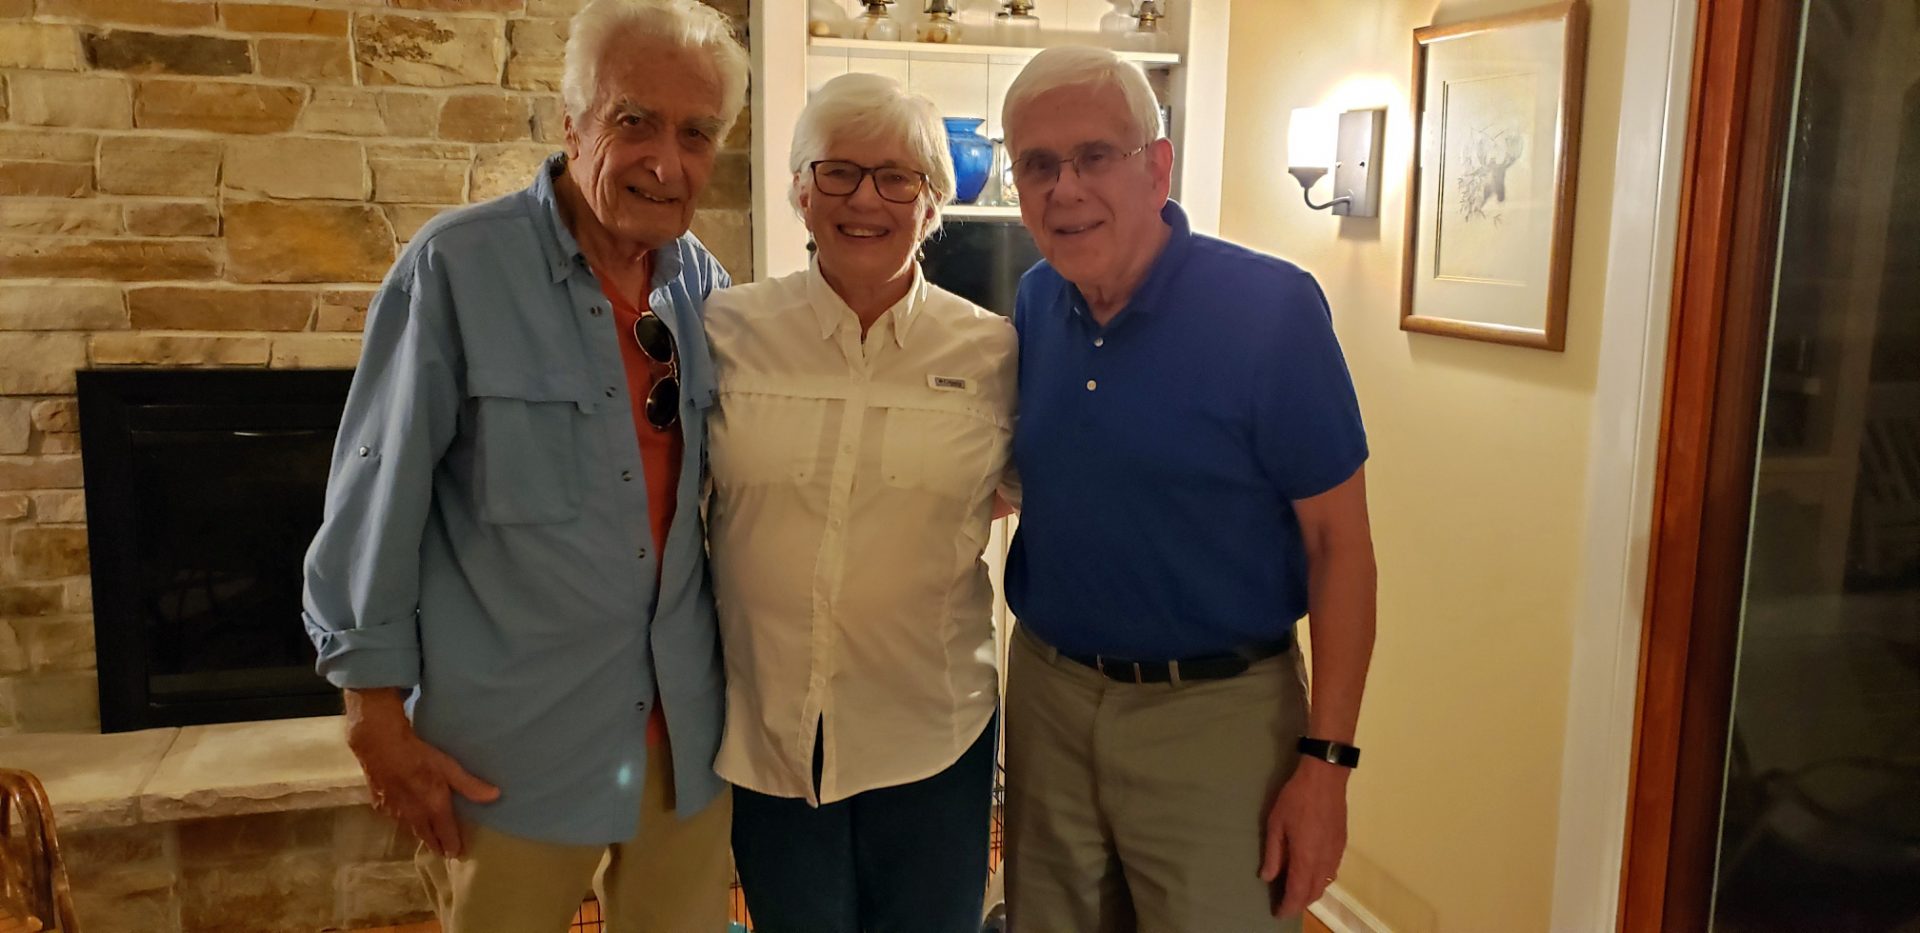 Richard, Elayne, Jerry in August of 2019